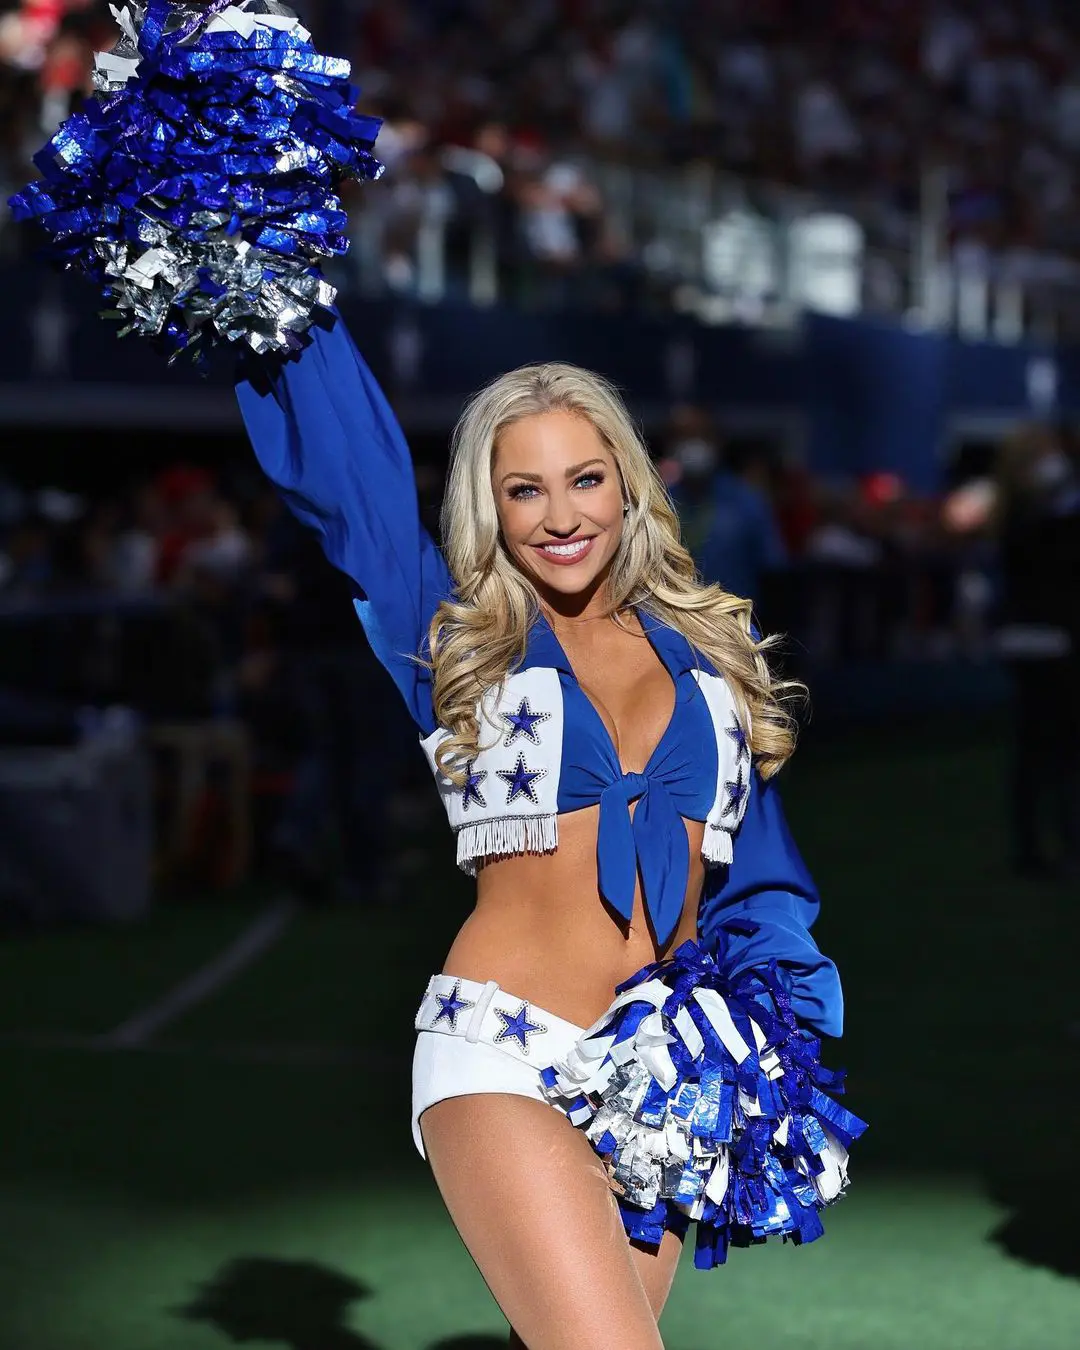 Lexie S. is very popular among Dallas Cowboys fans 